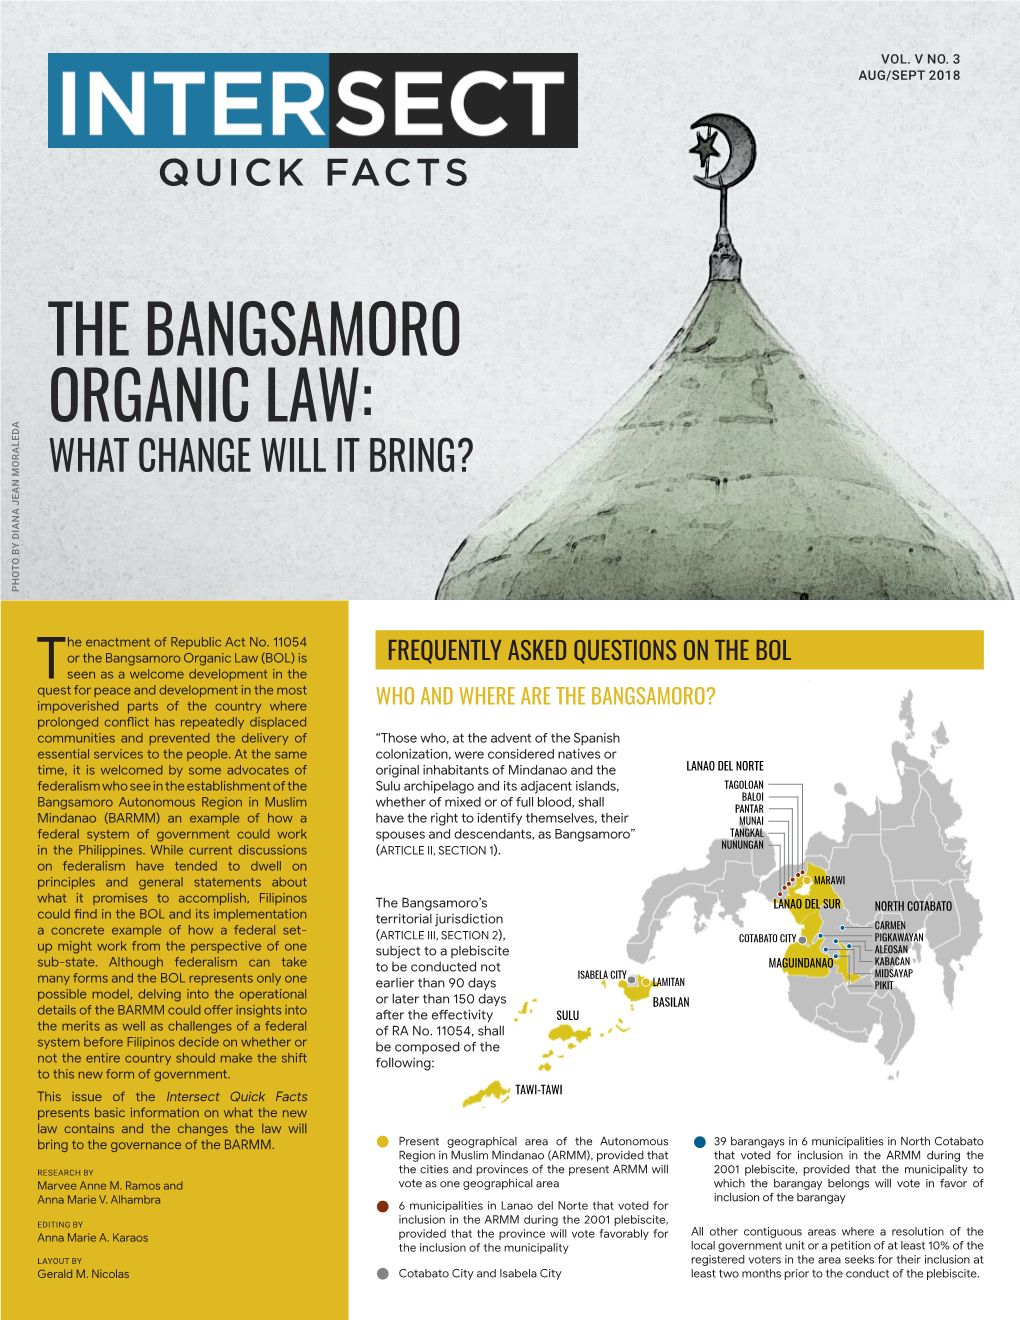 The Bangsamoro Organic Law: What Change Will It Bring? Photo by Diana Jean Moraleda Diana Jean by Photo